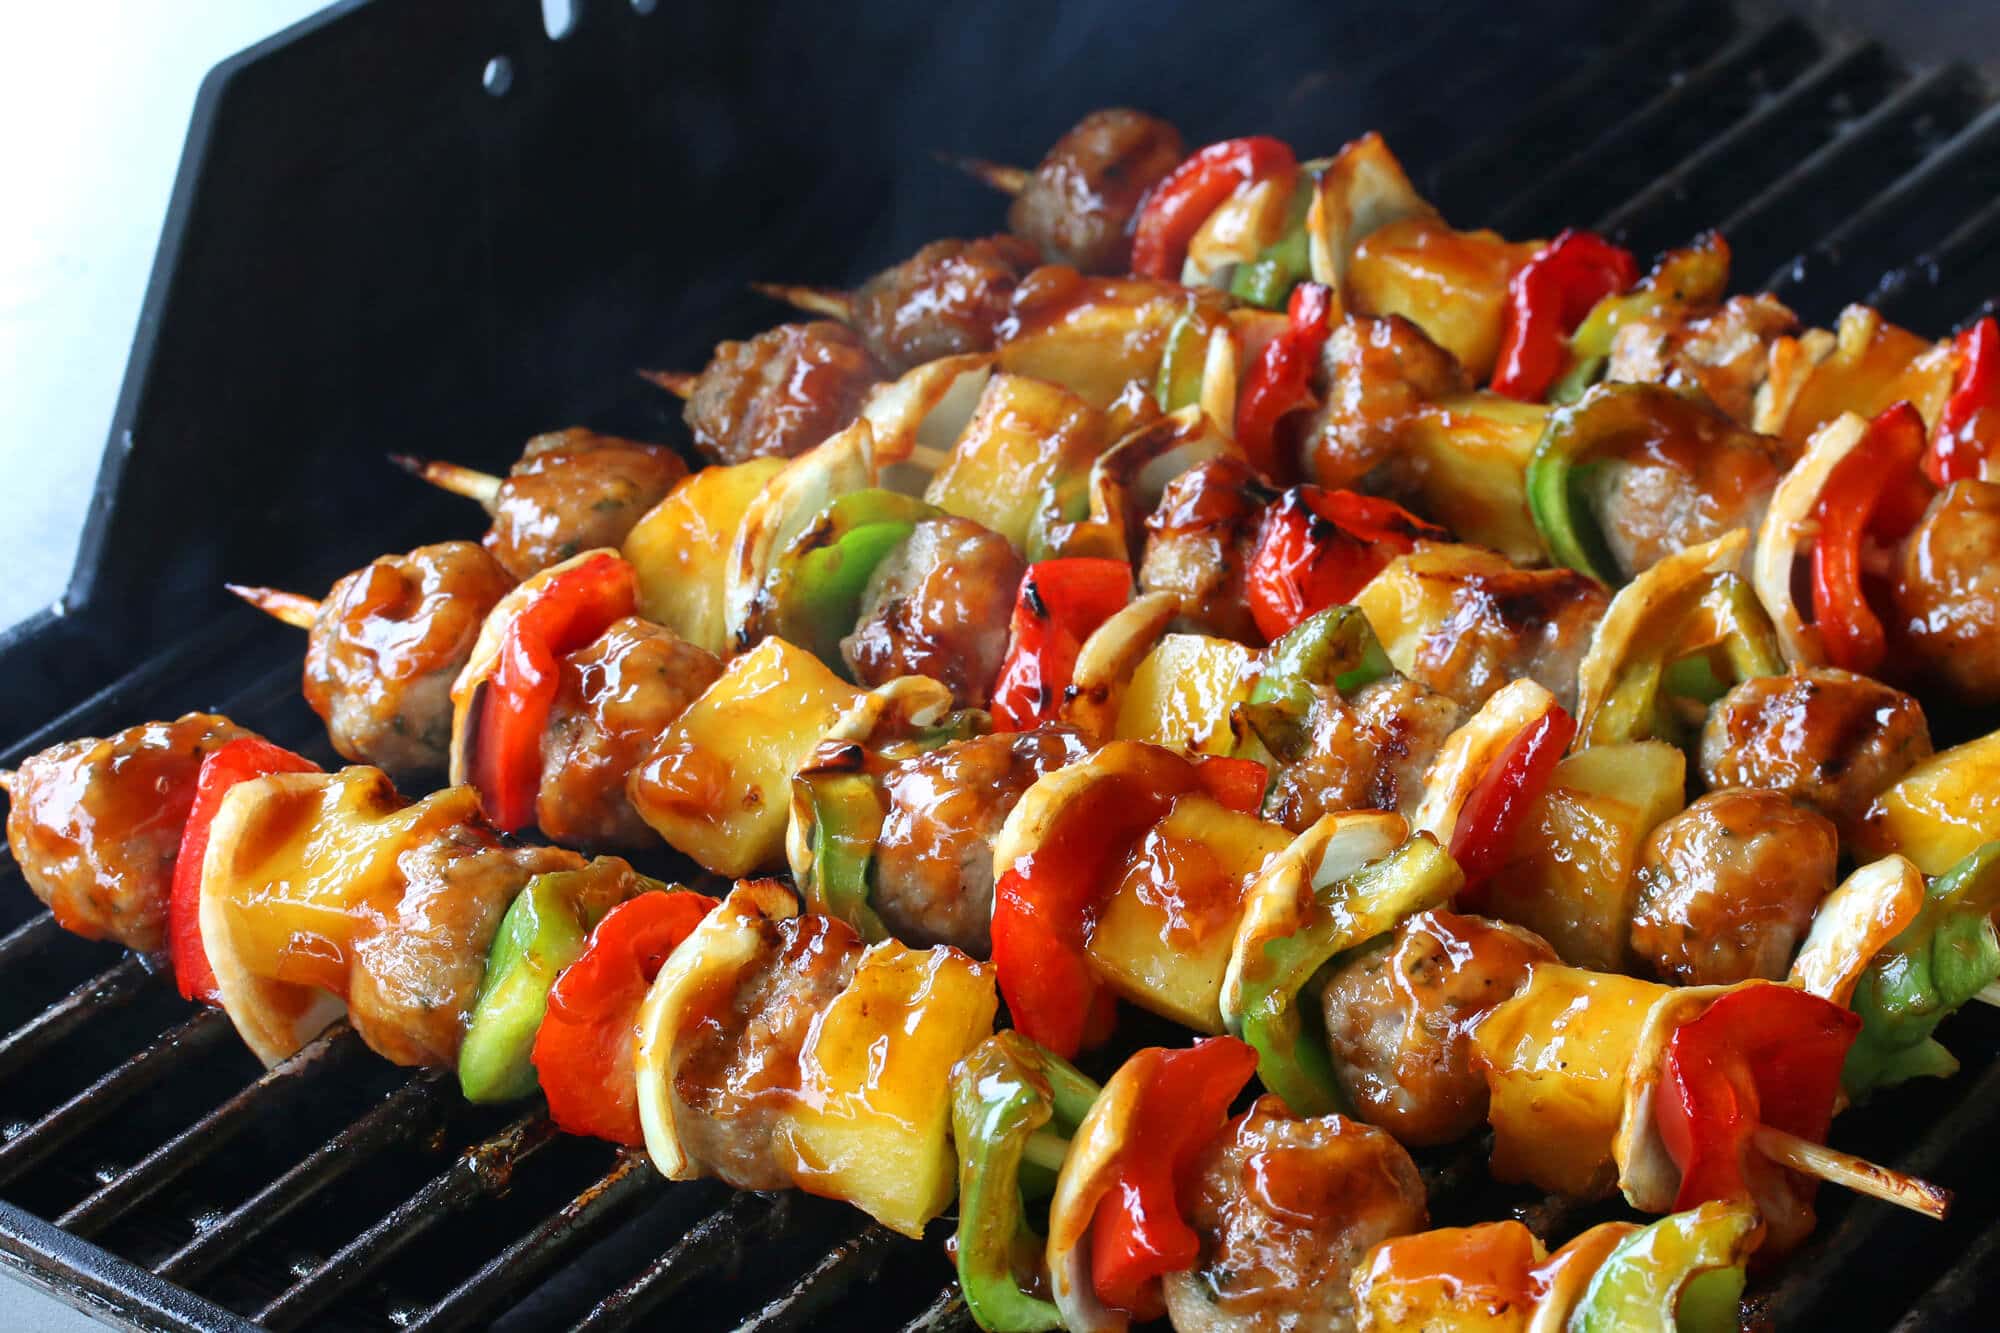 The Skewers Recipe with Pork, Pineapple, and Onions Hits Just Right